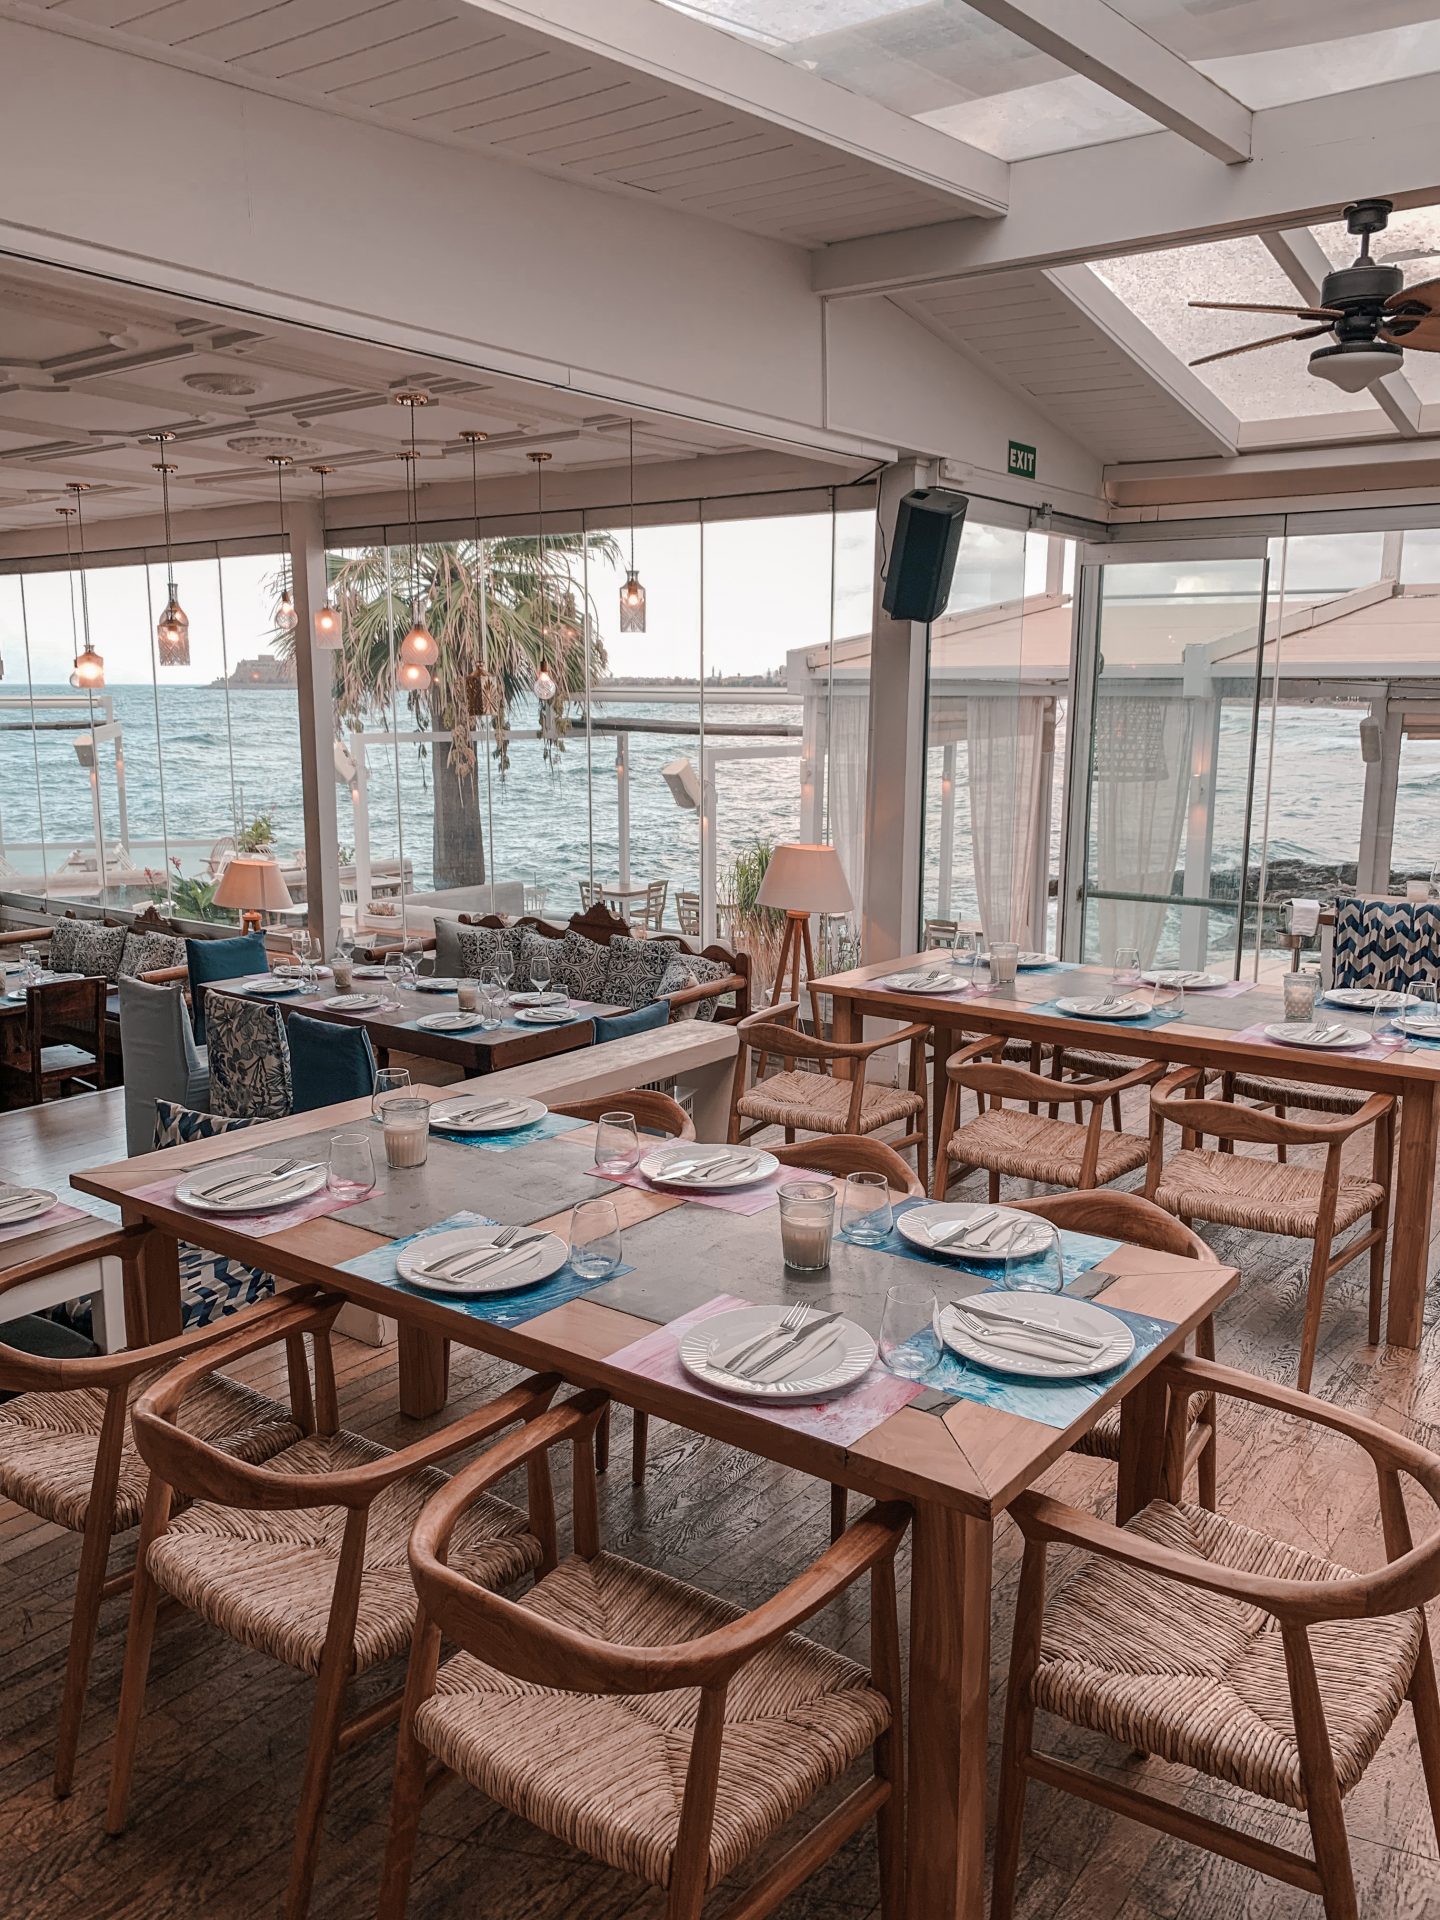 Cavo Rethymno Restaurant, Crete, Greece located at the edge of the town overlooking Fortezza castle and the Mediterranean Sea